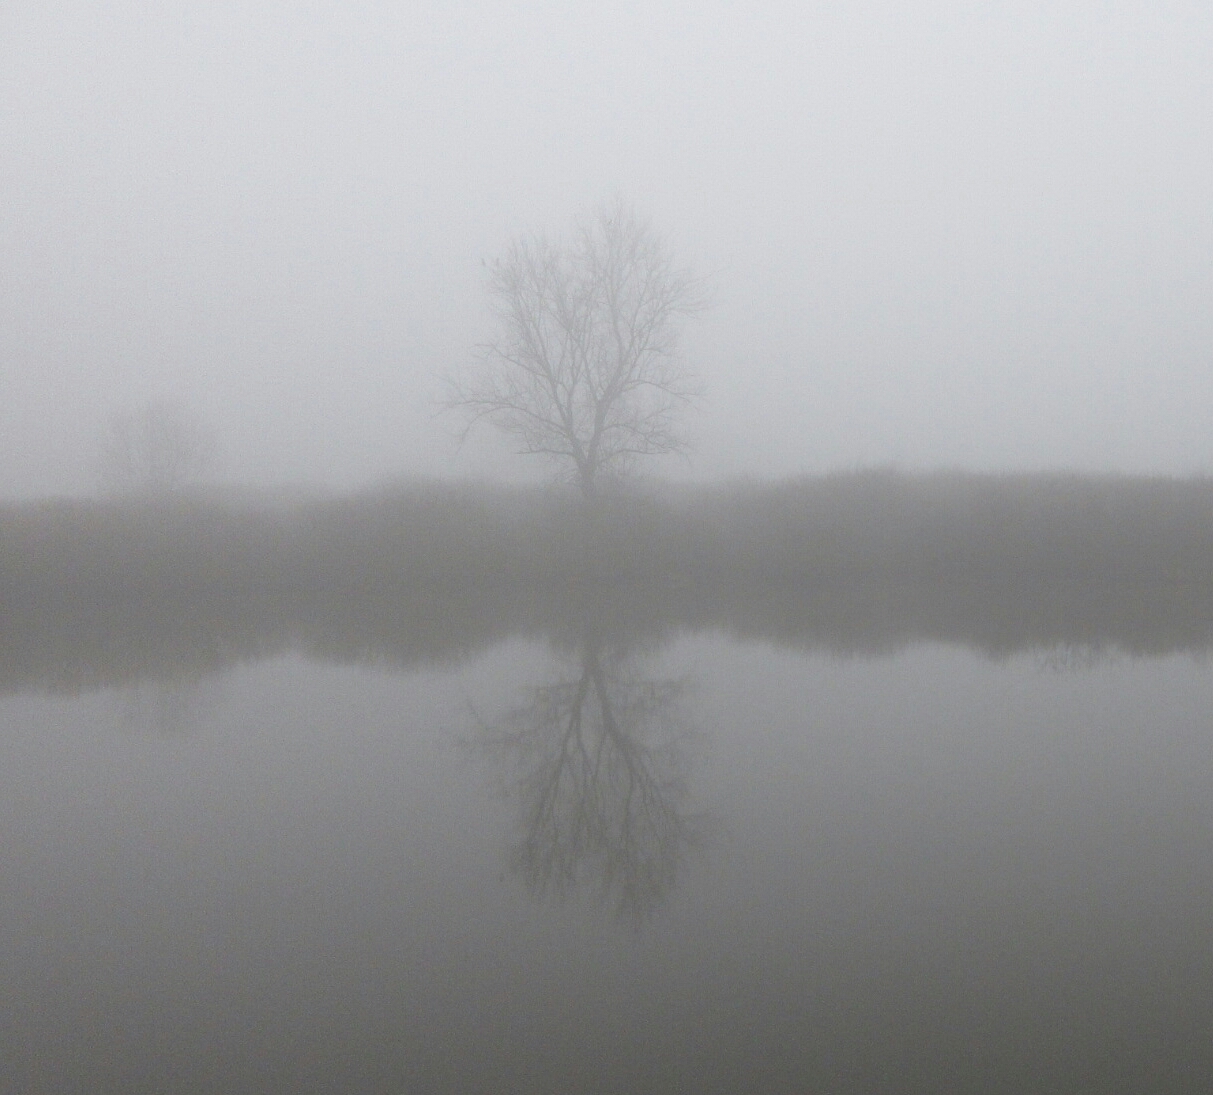 Mirroring yourself in the fog ...